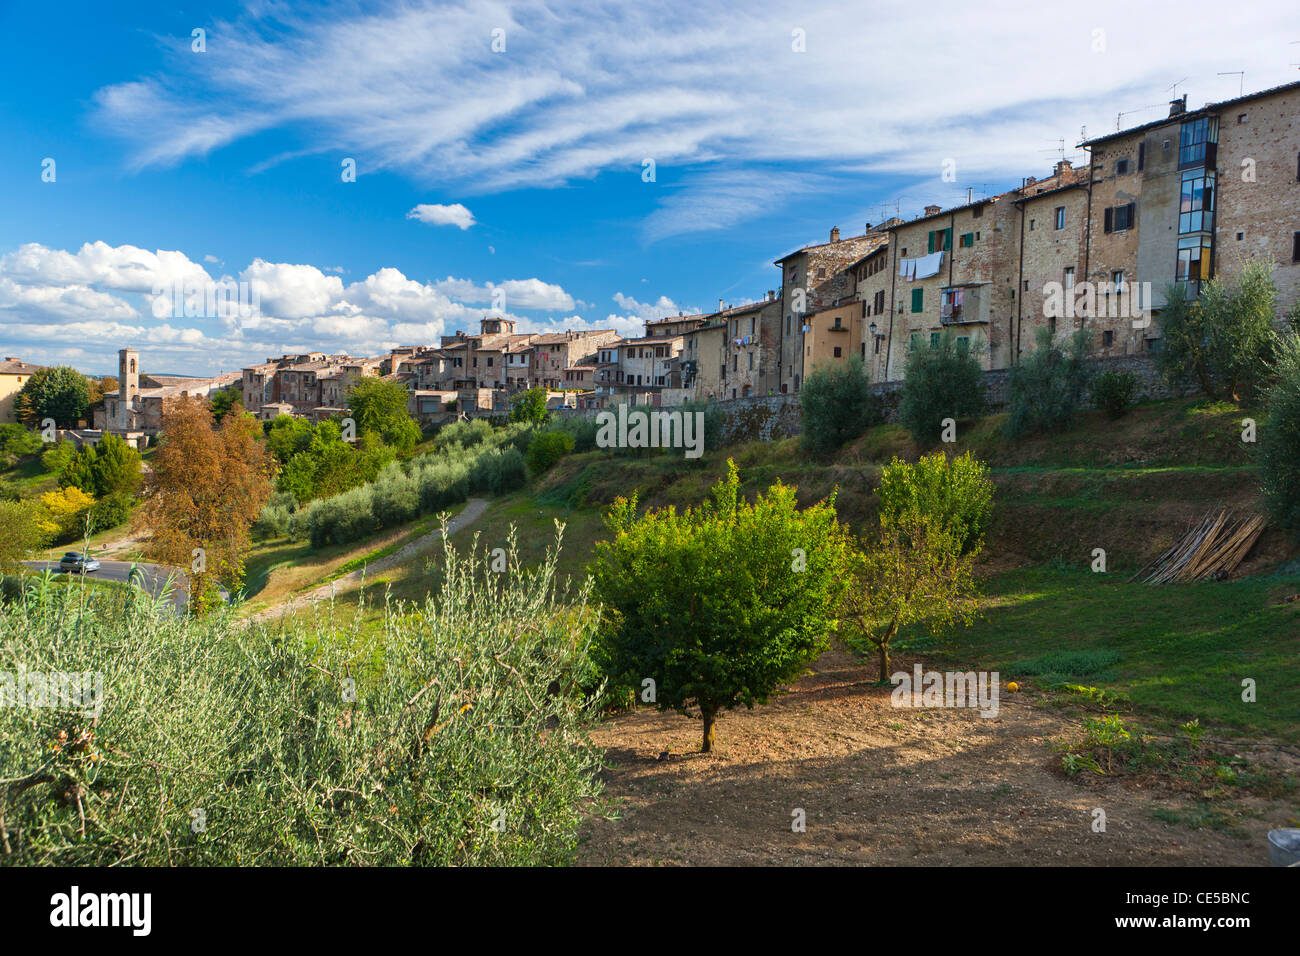 Colle Di Val D'elsa High Resolution Stock Photography and Images - Alamy